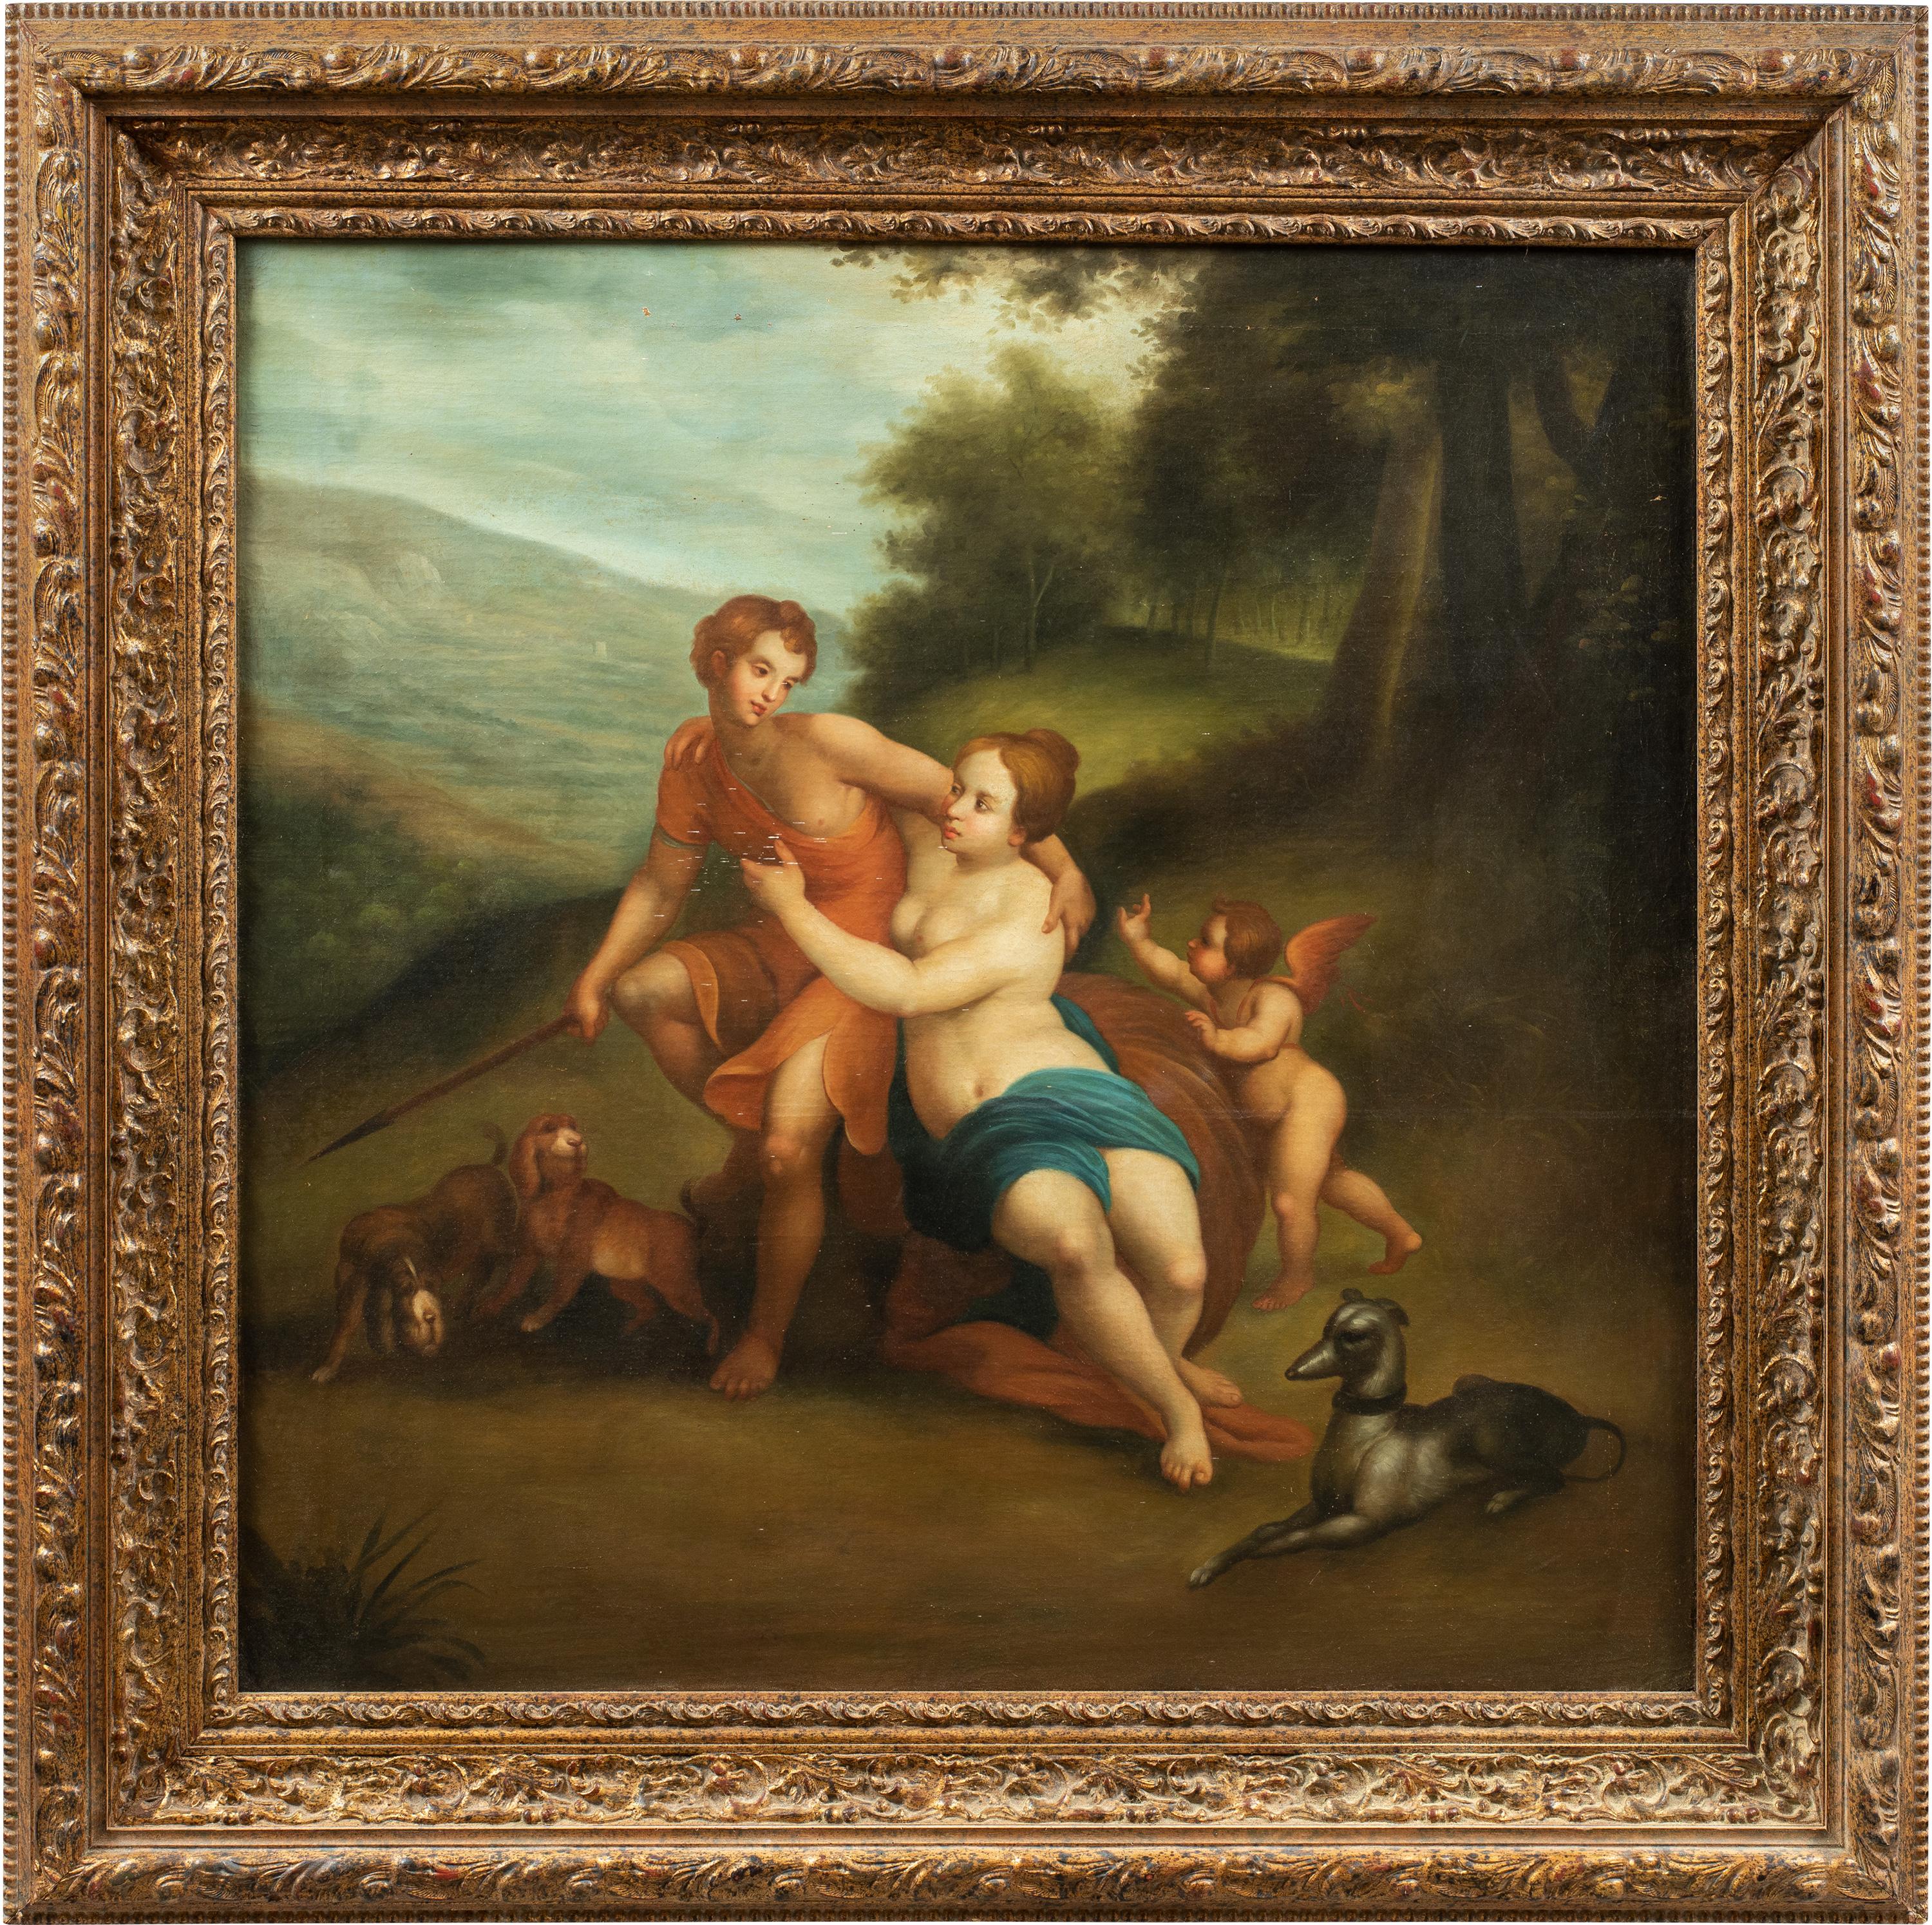 Neoclassical painter - 18th-19th century figure painting - Mythological - Italy